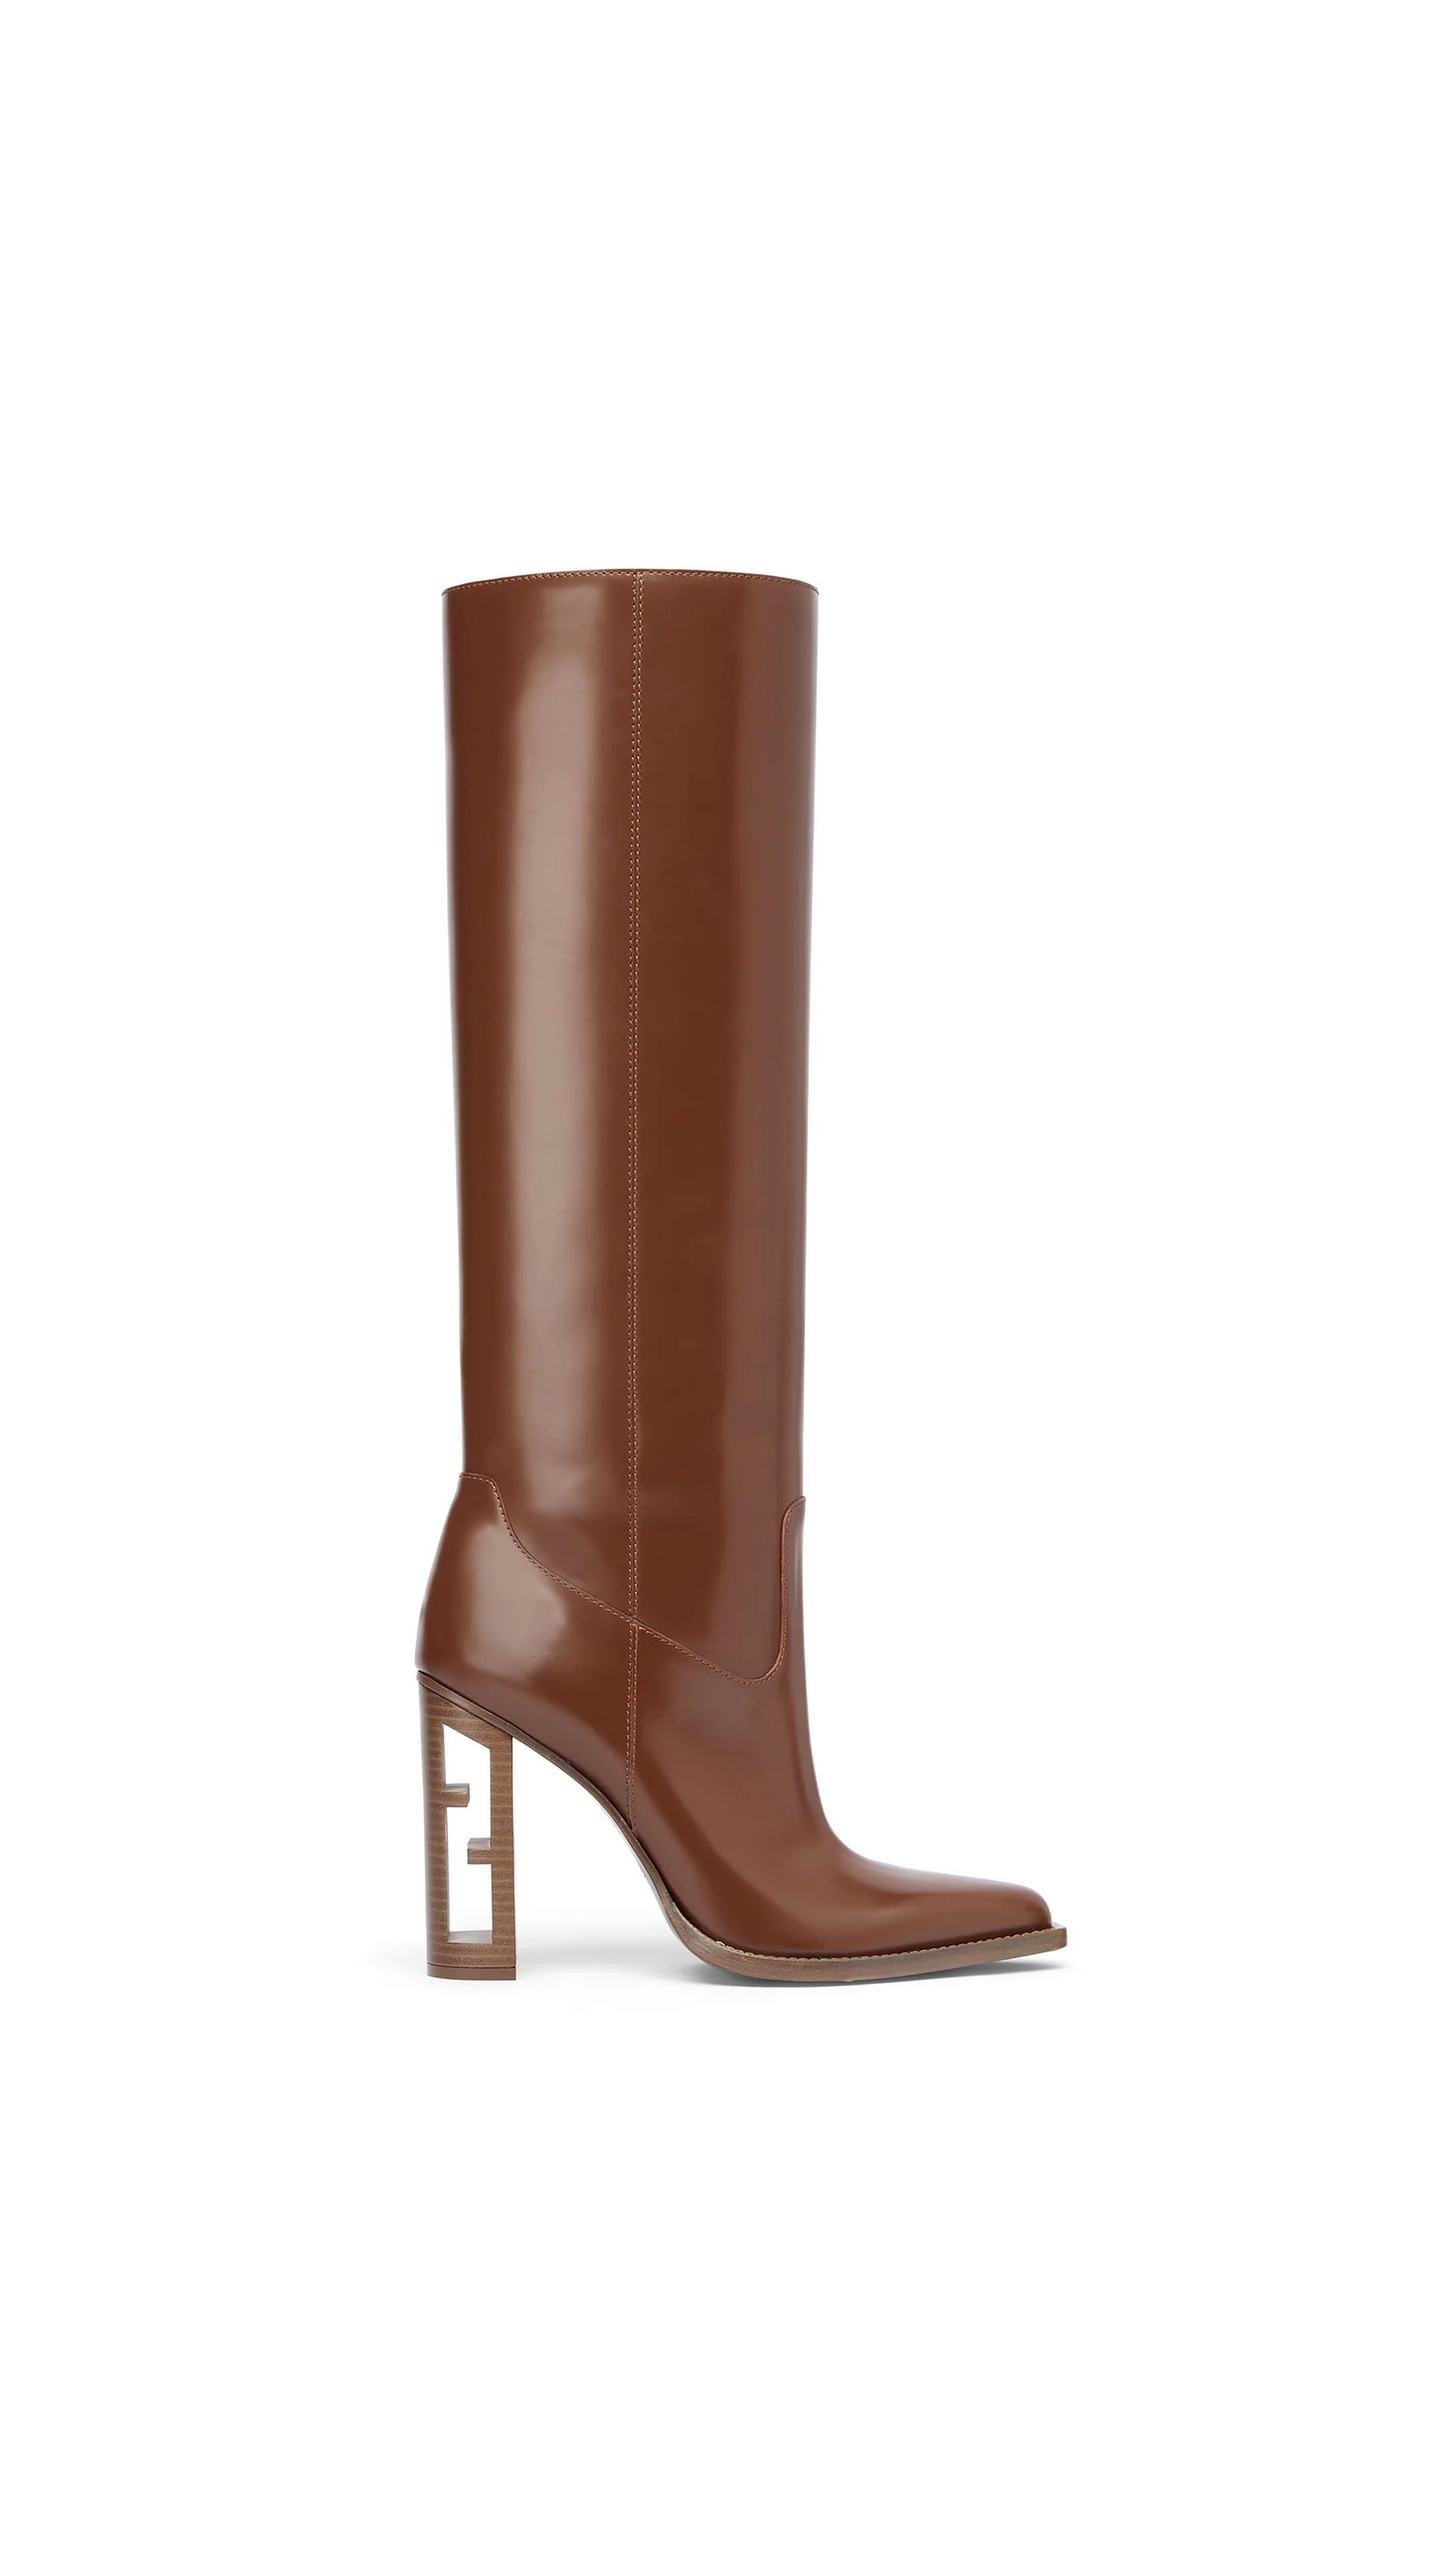 Cut Leather High-heeled Boots - Brown